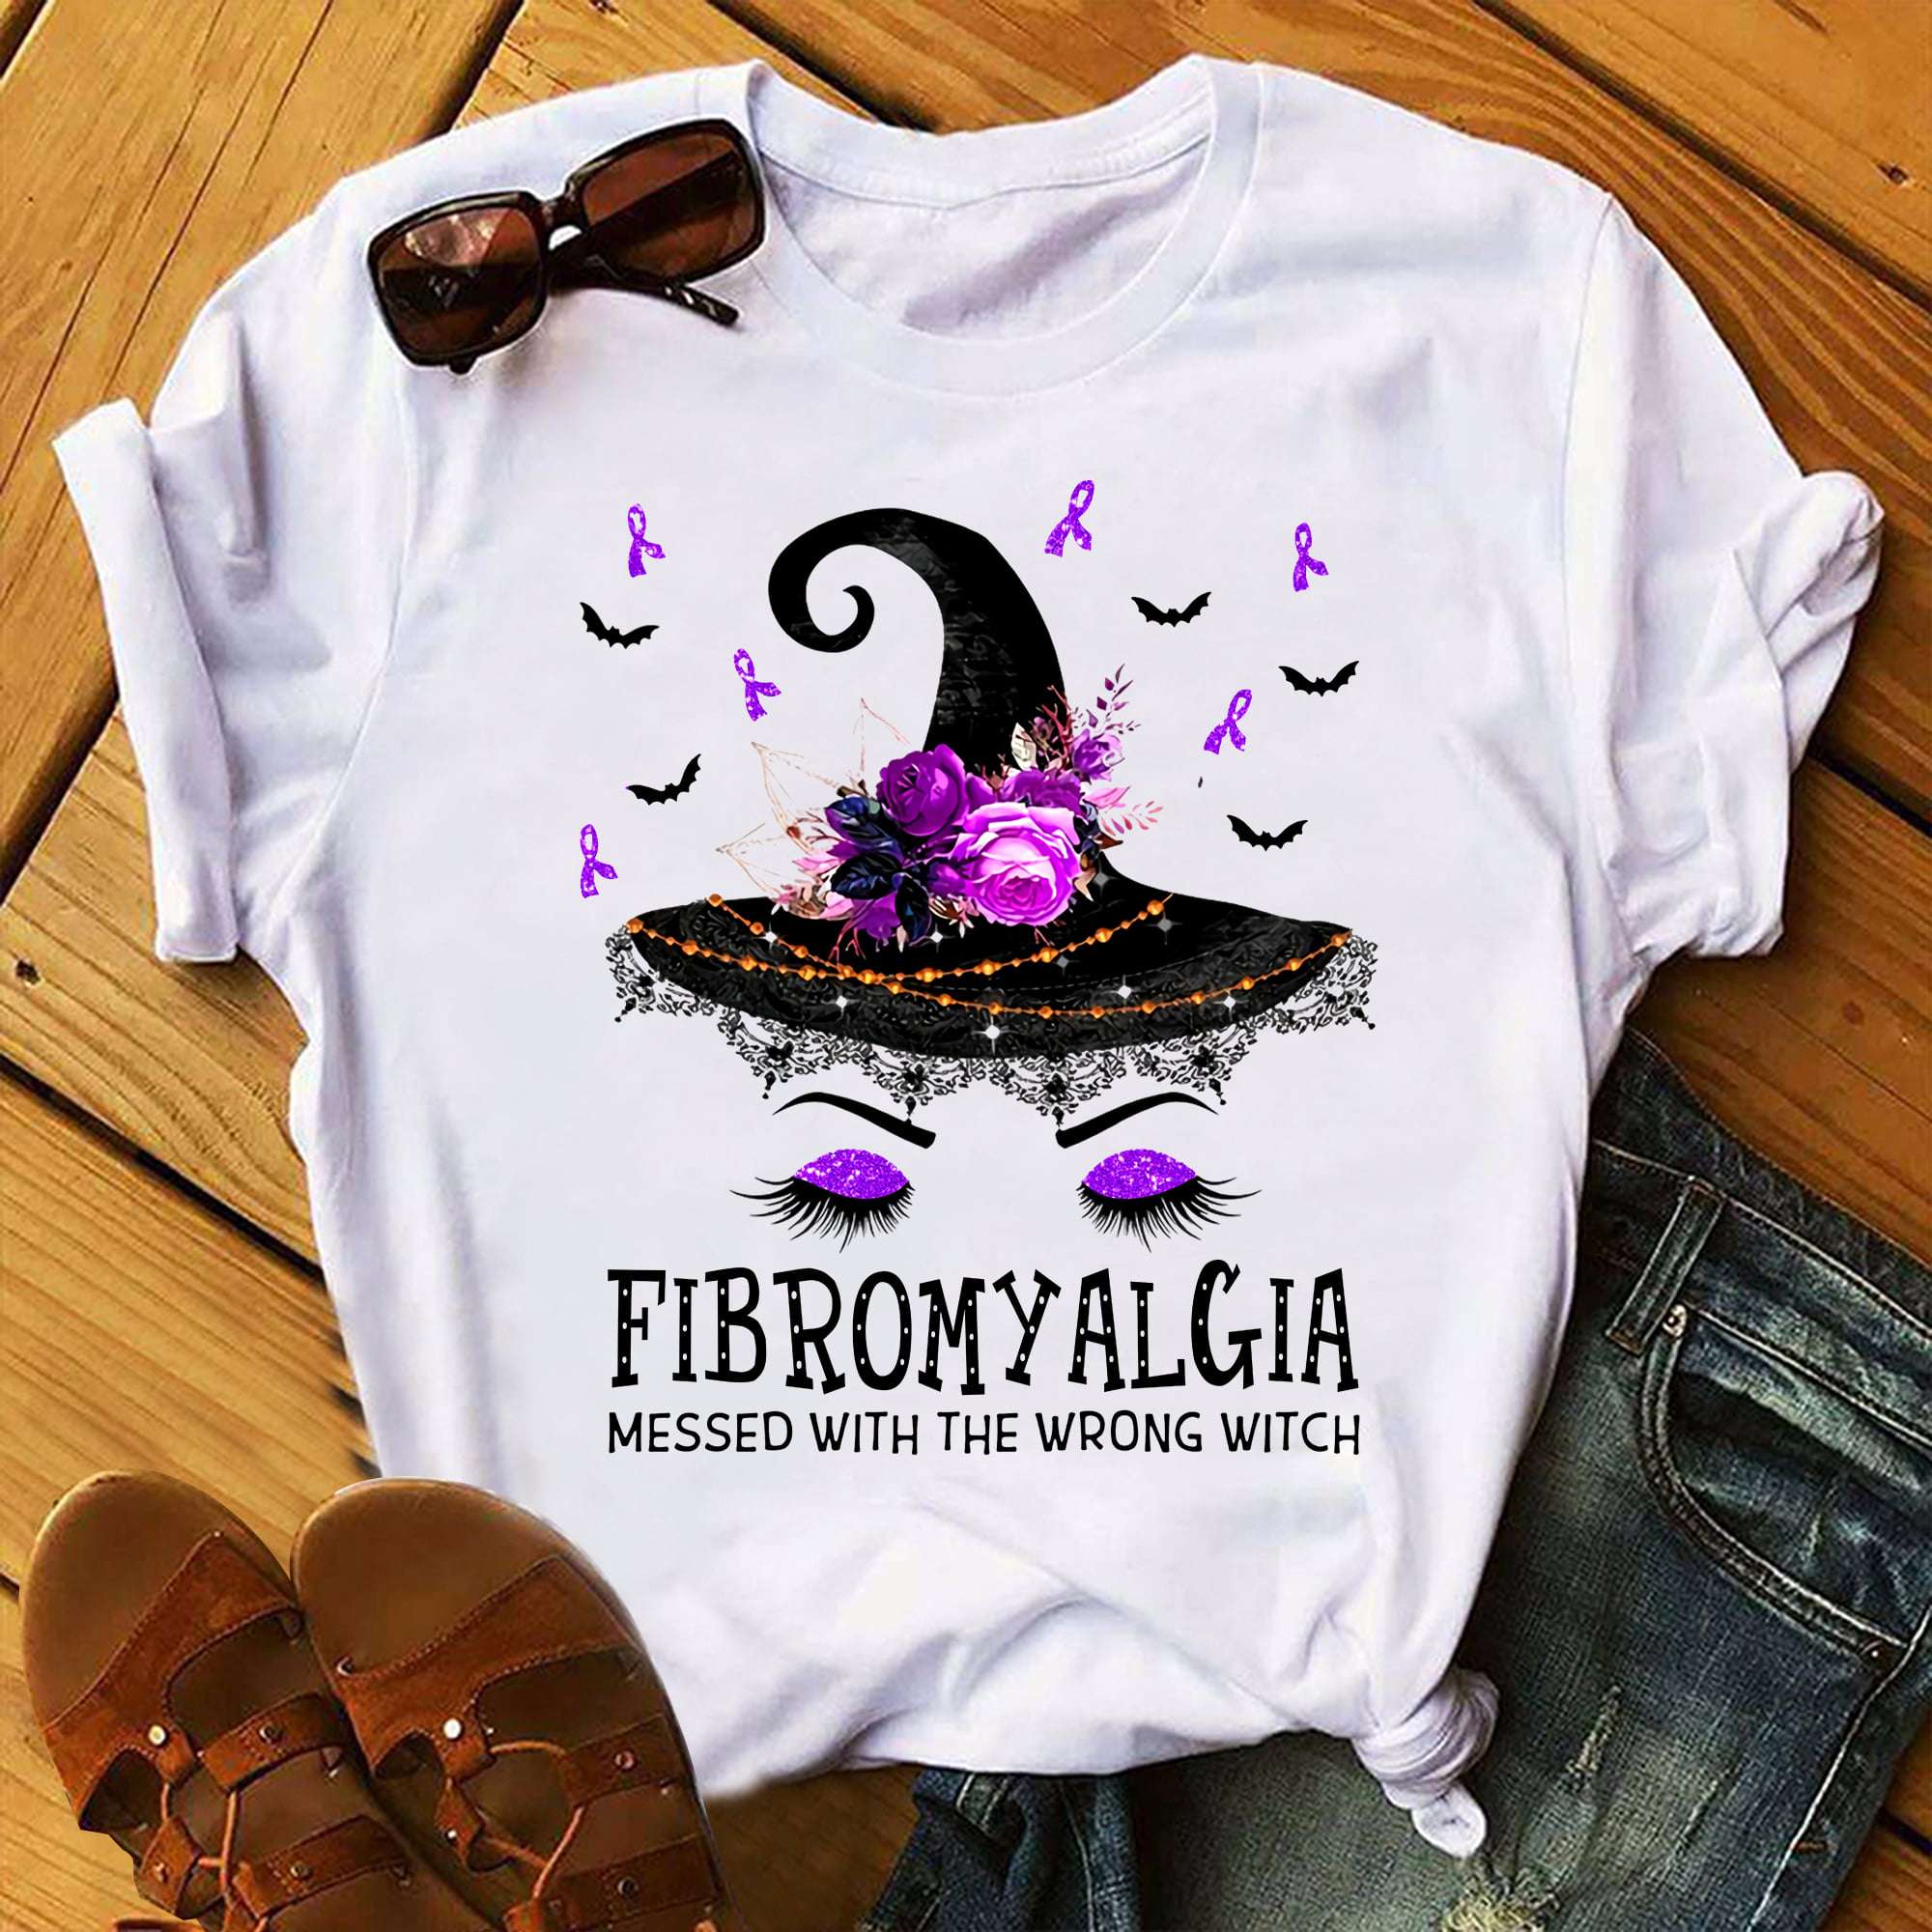 Fibromyalgia Witch, Halloween Costume - Fibromyalgia messed with the wrong witch